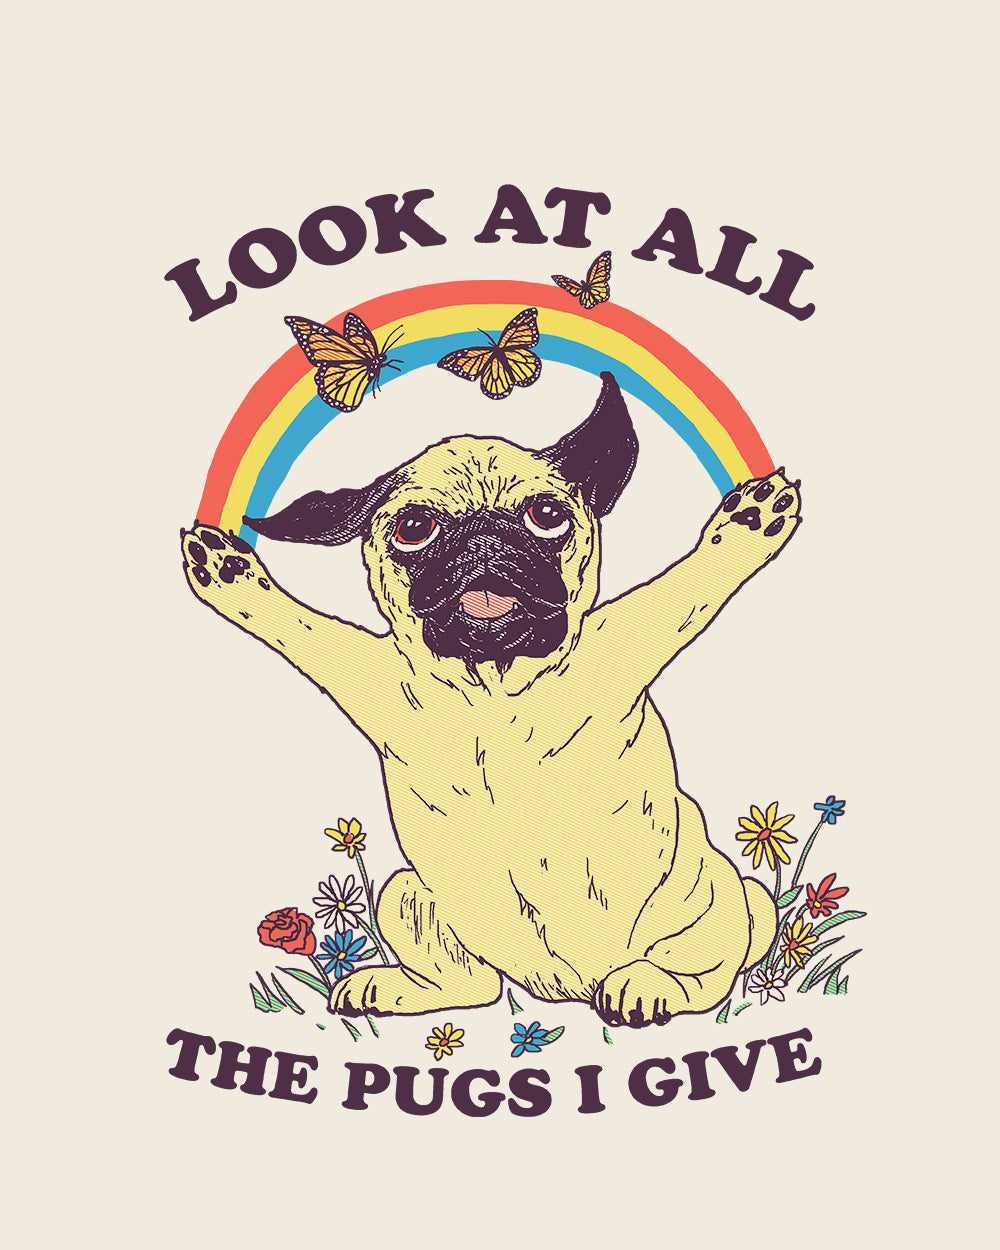 All the Pugs I Give Hoodie Australia Online #colour_natural